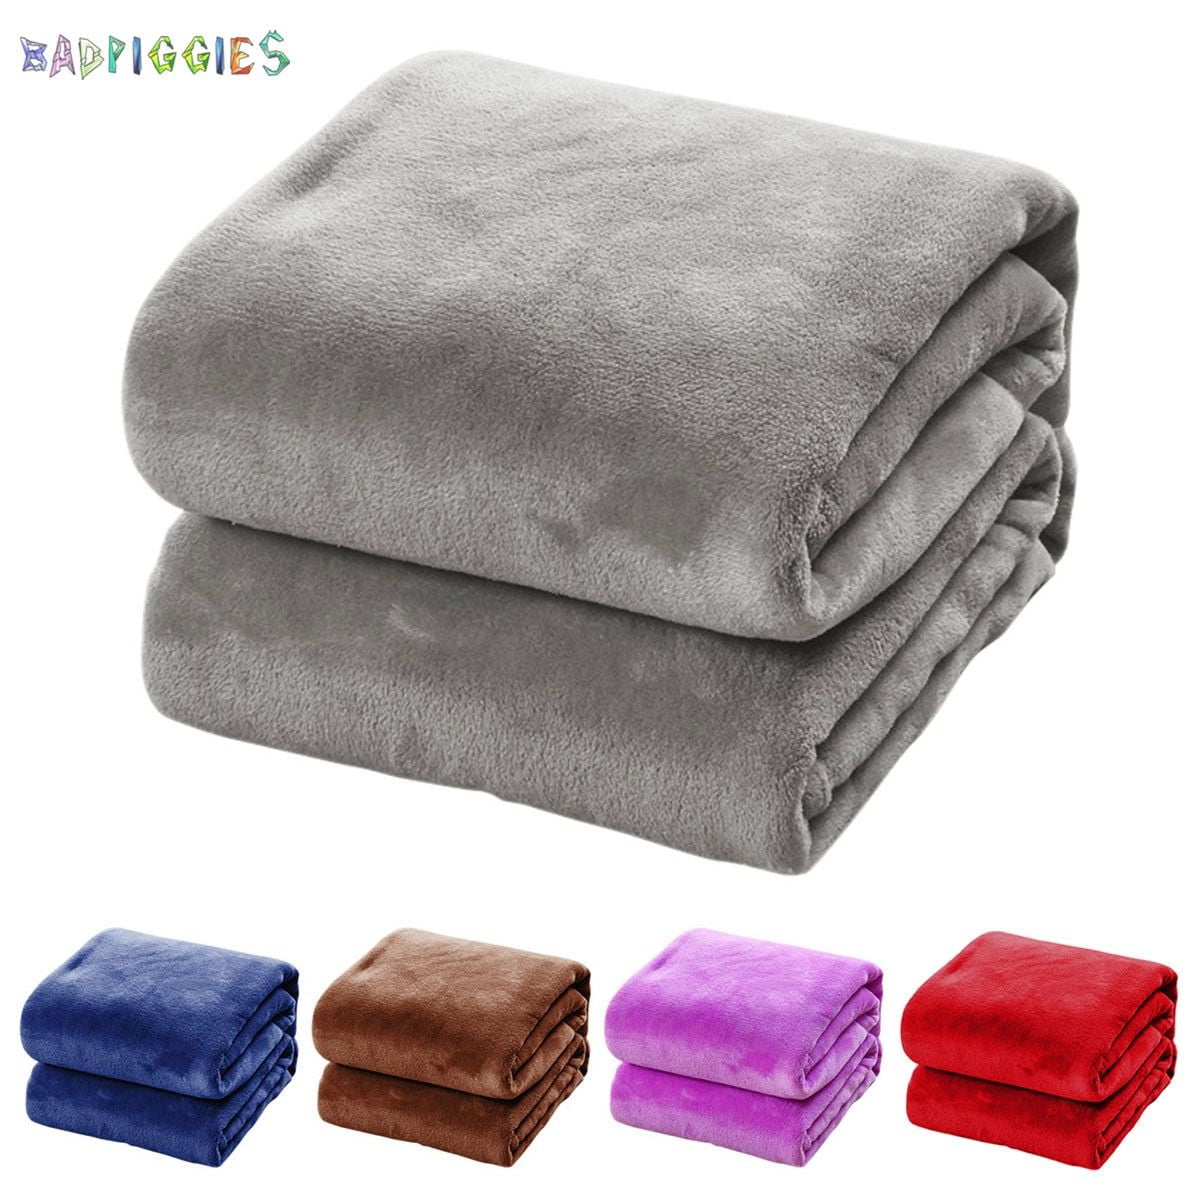 Throw Blanket Bedding Thermal Soft Coral Fleece,anti-static And Ultra Soft  Bed Blankets Throws For Bed/couch/sofa/office/camping - Blanket - AliExpress